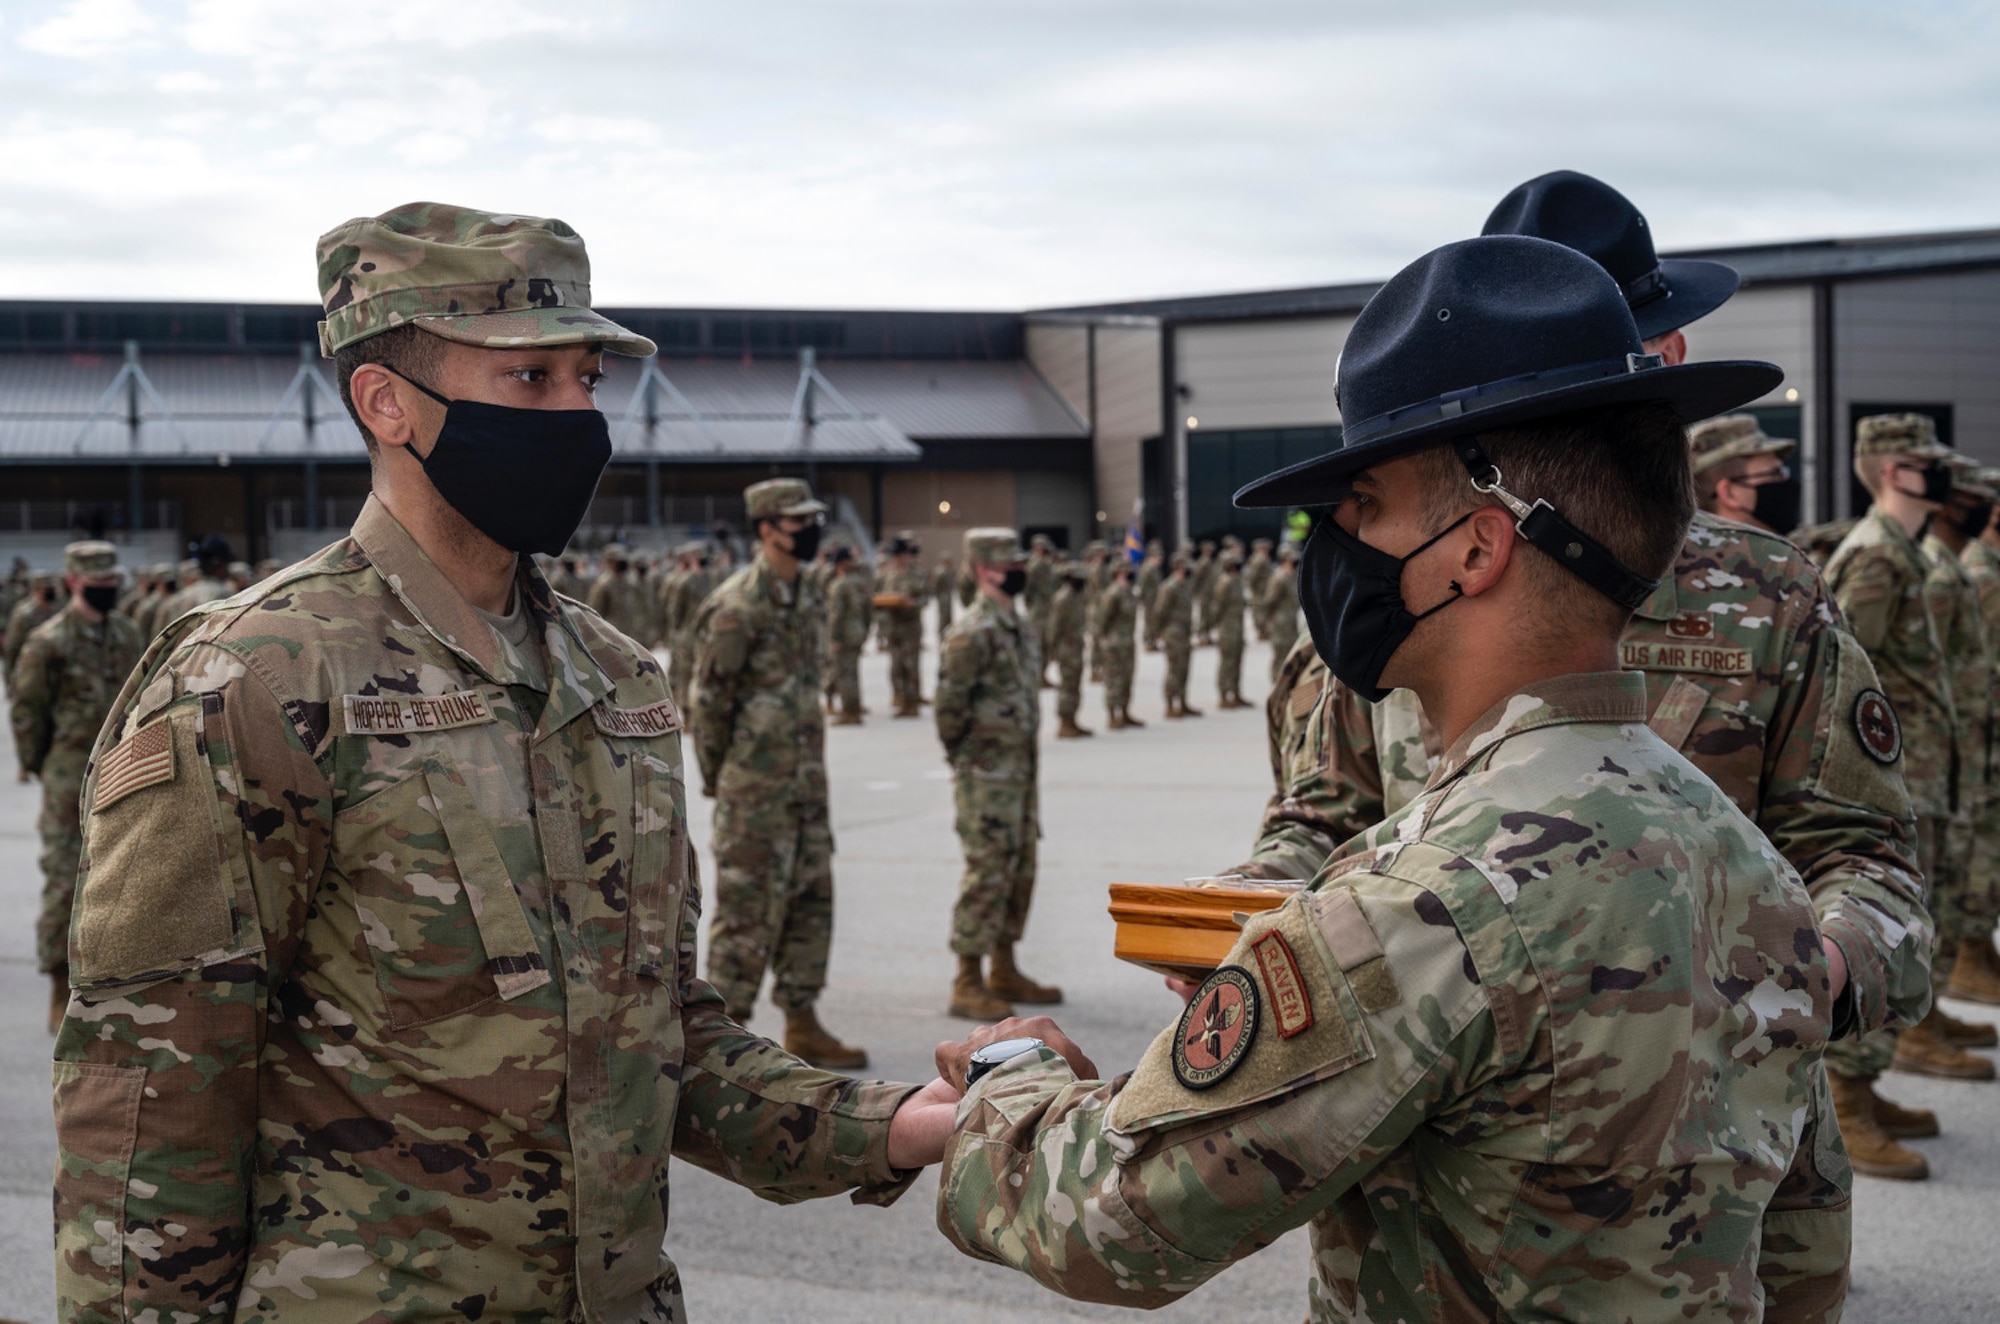 A trainee receives an Airmen's coin from a Military Training Instructor.